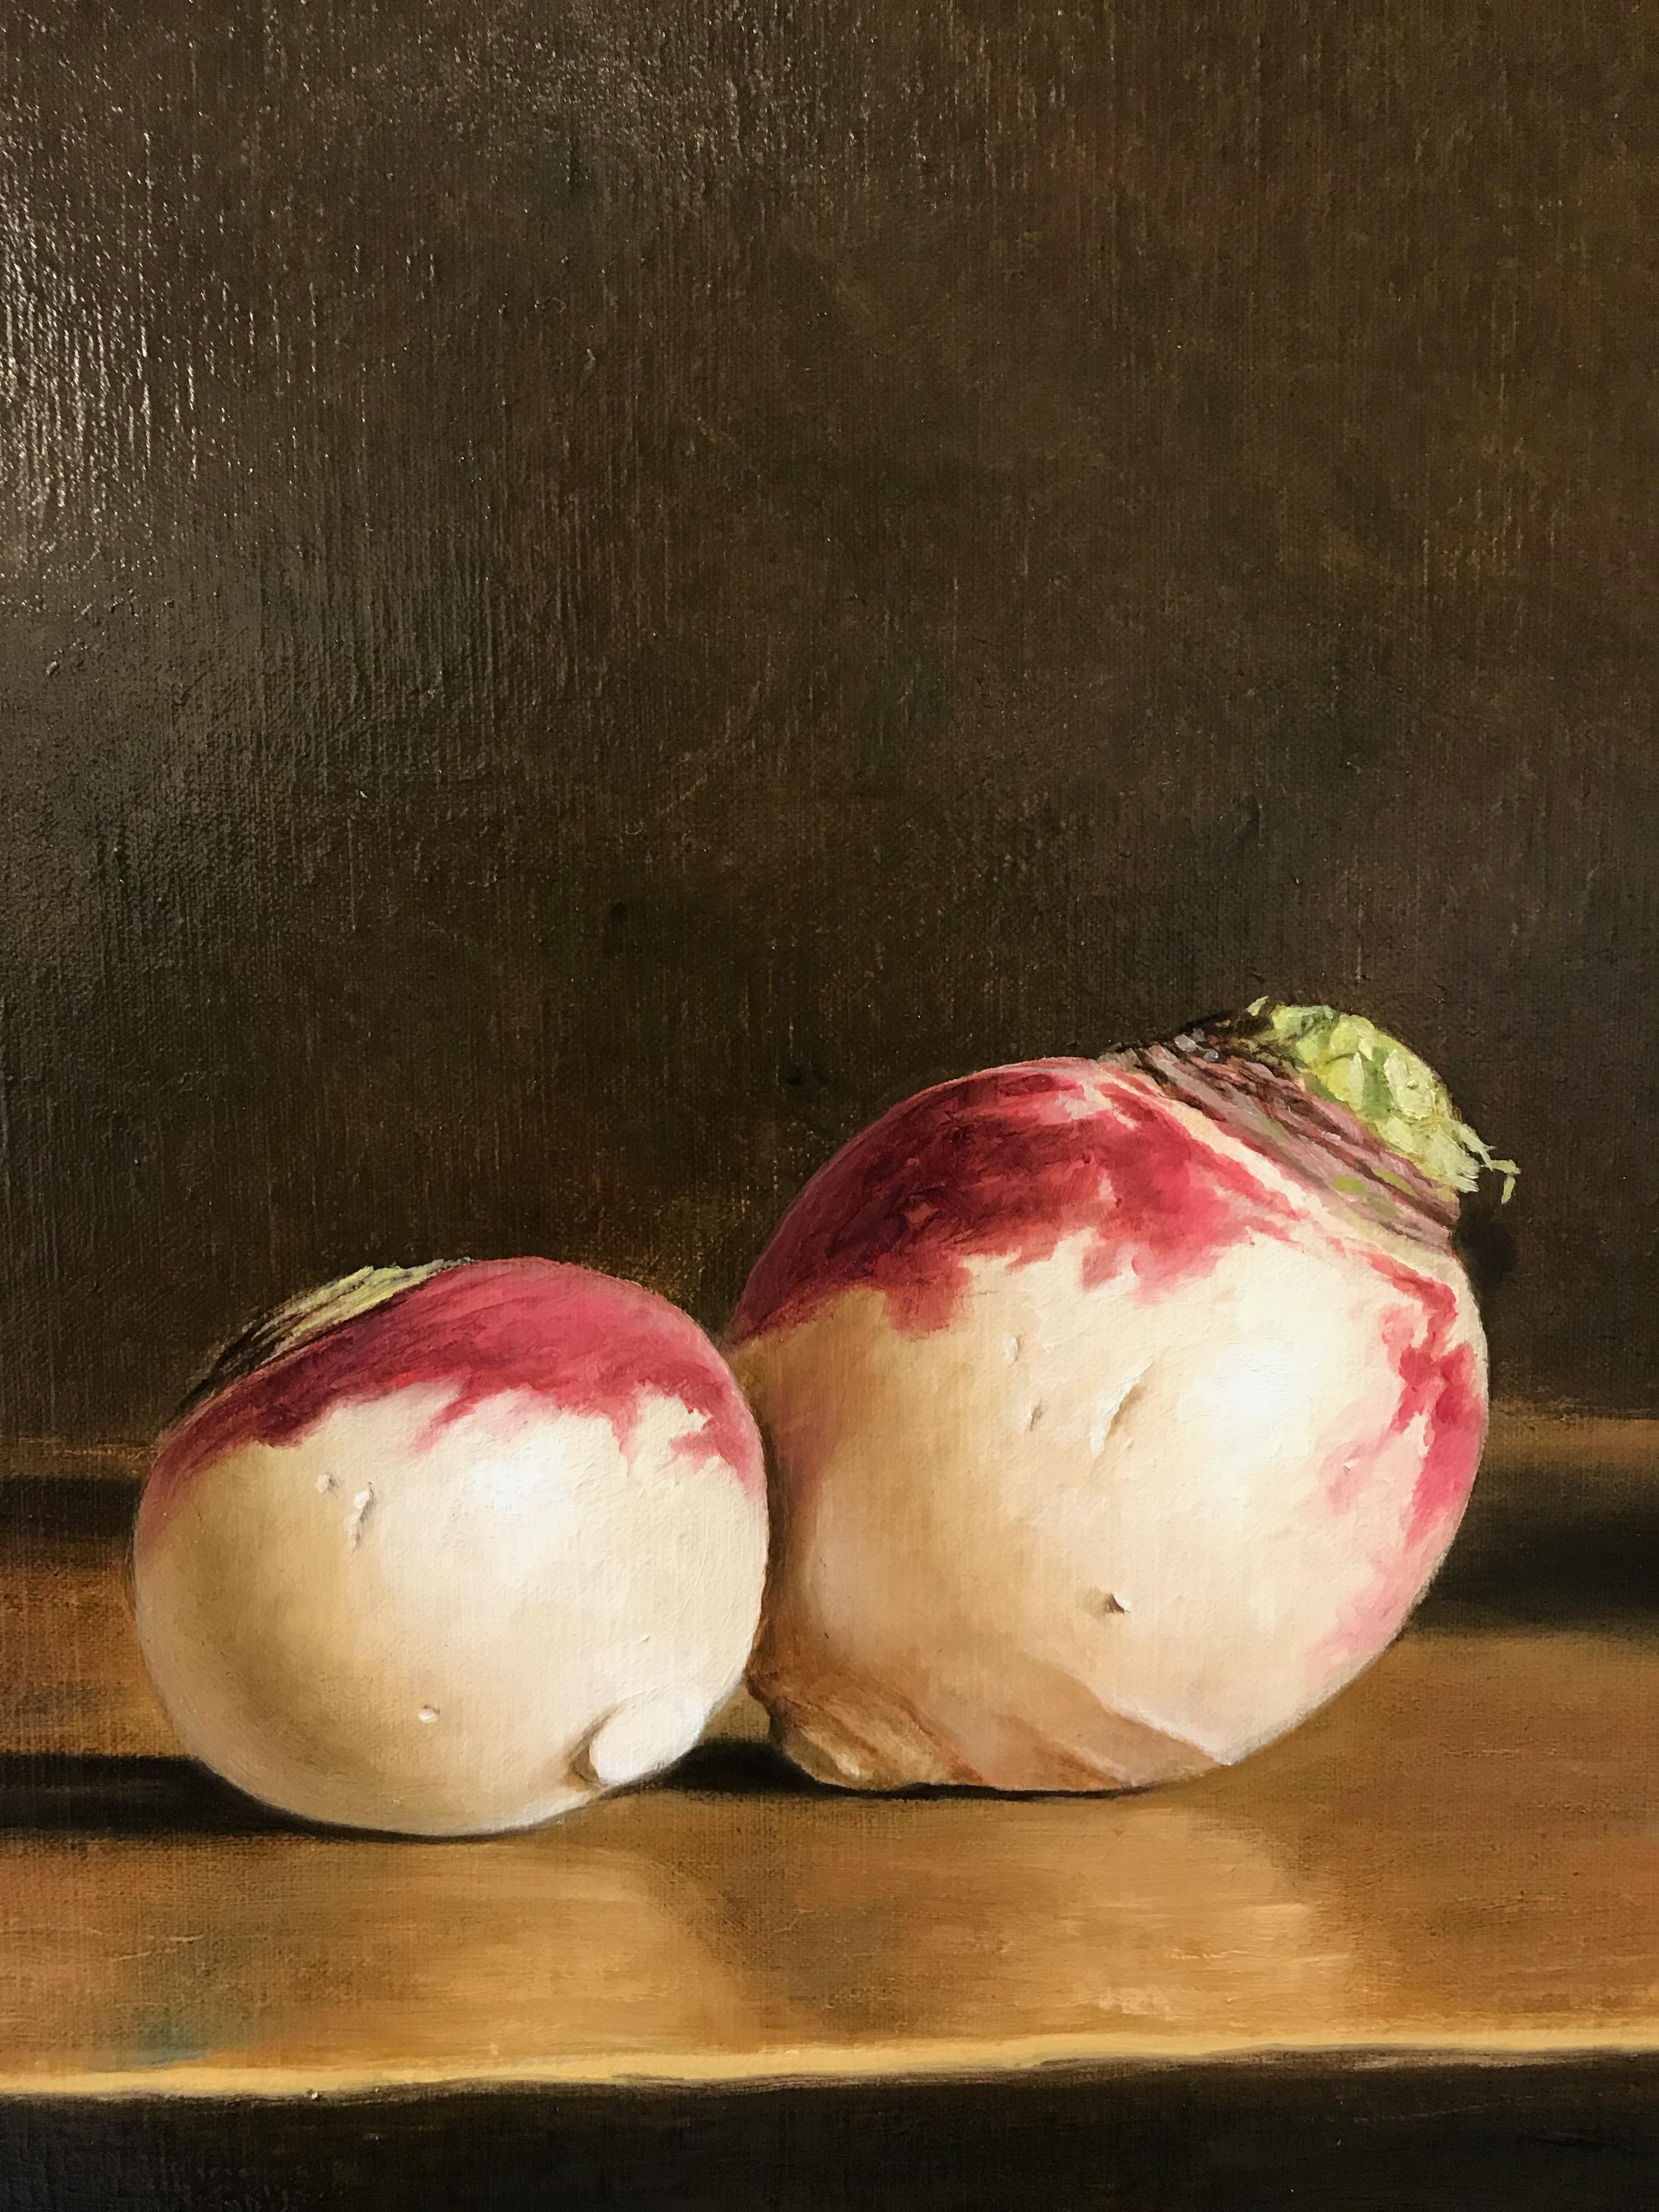 Hand-Painted 'Still Life with Kohlrabi and Turnips' by Stefaan Eyckmans